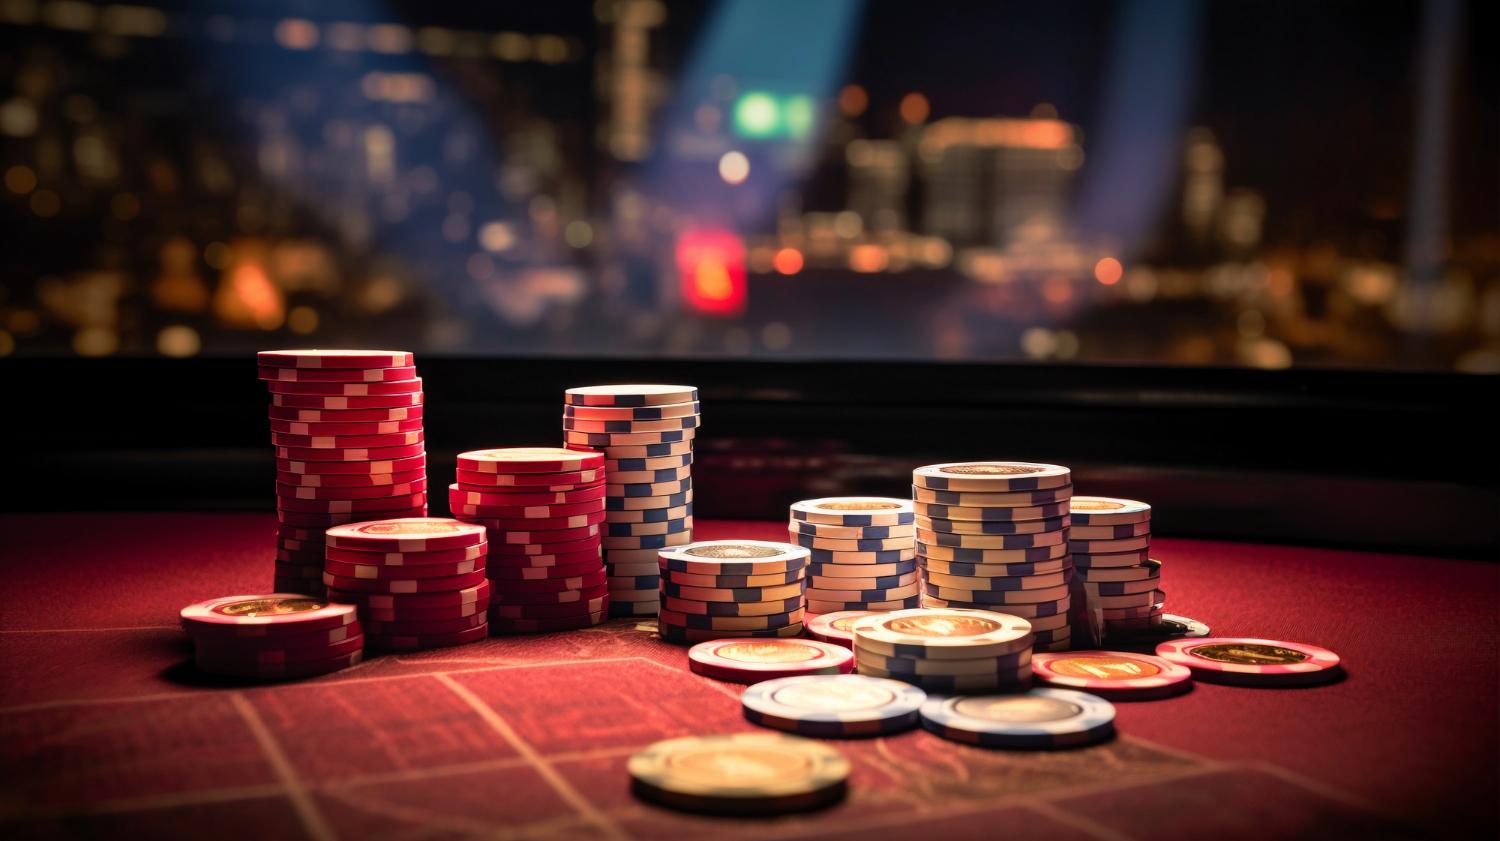 Stacks of colorful casino chips on a table with a blurry city nightscape in the background.